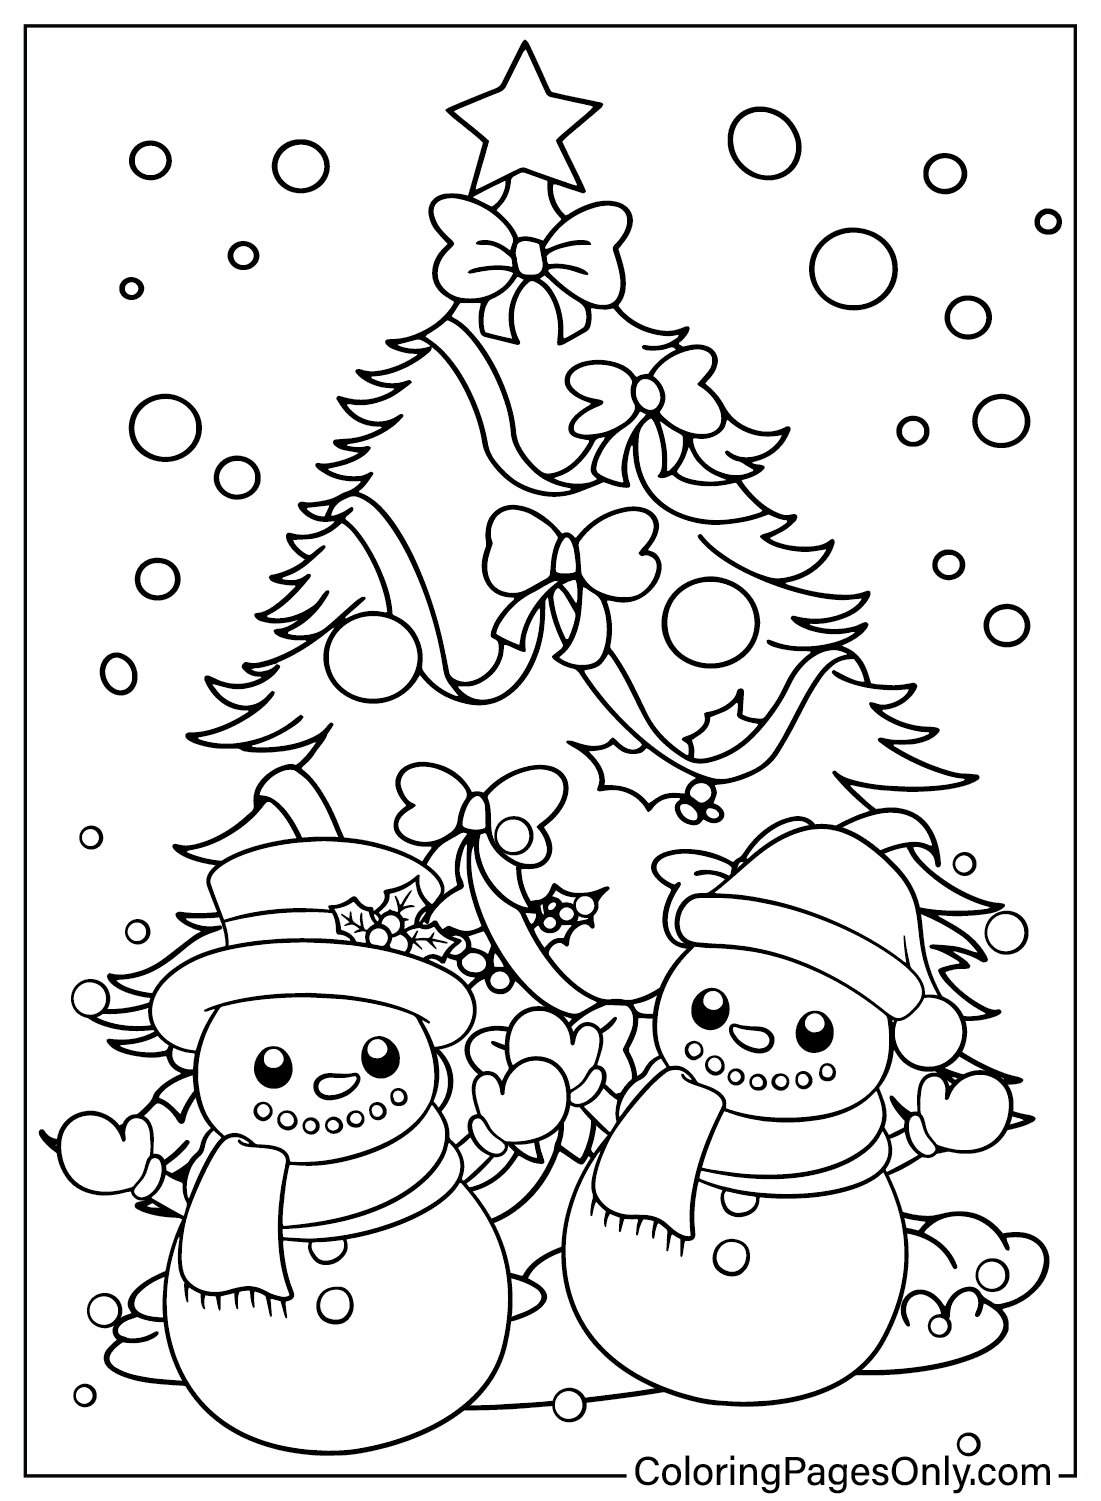 Christmas Tree and Snowman Coloring Page